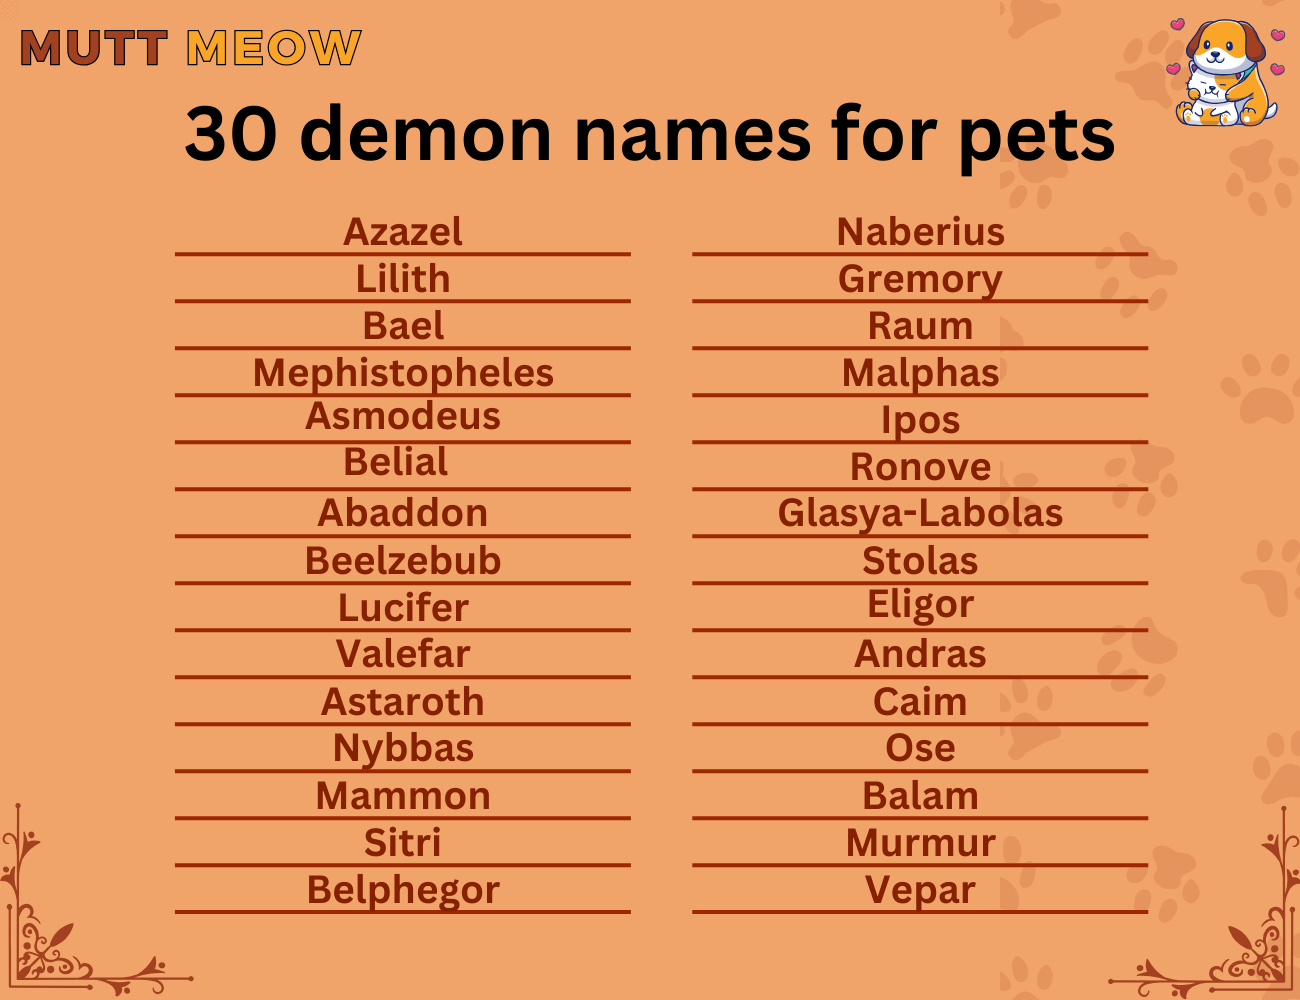 30 demon names for pets